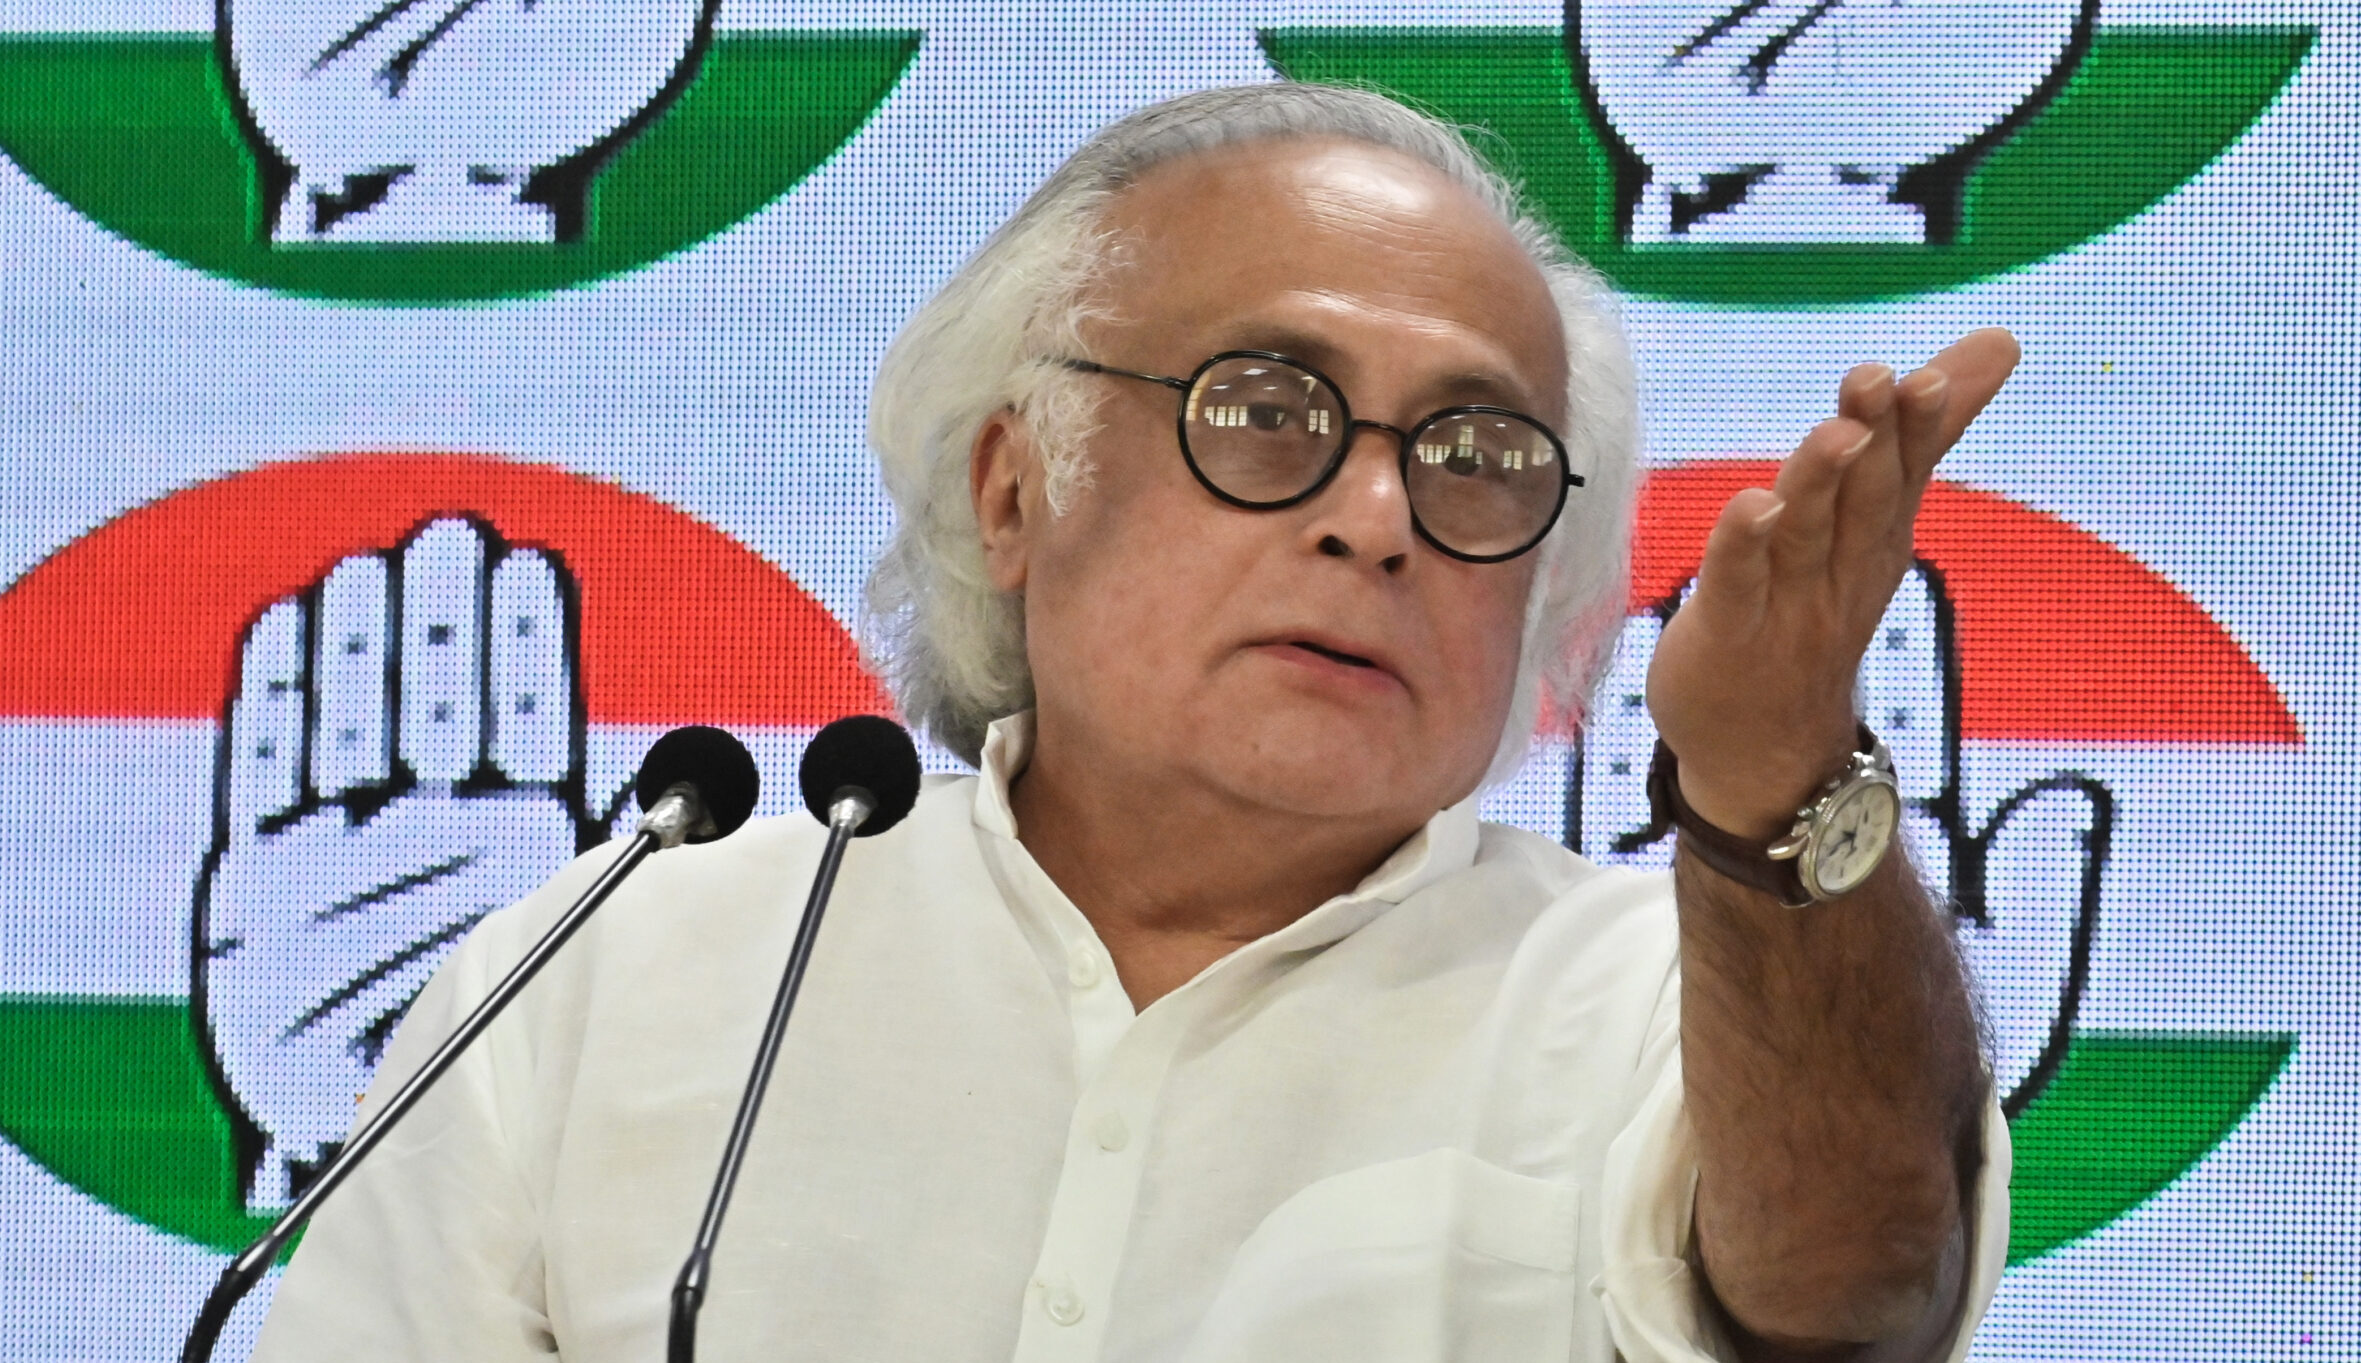 Congress extrapolates PM Modi over early trends from Karnataka elections